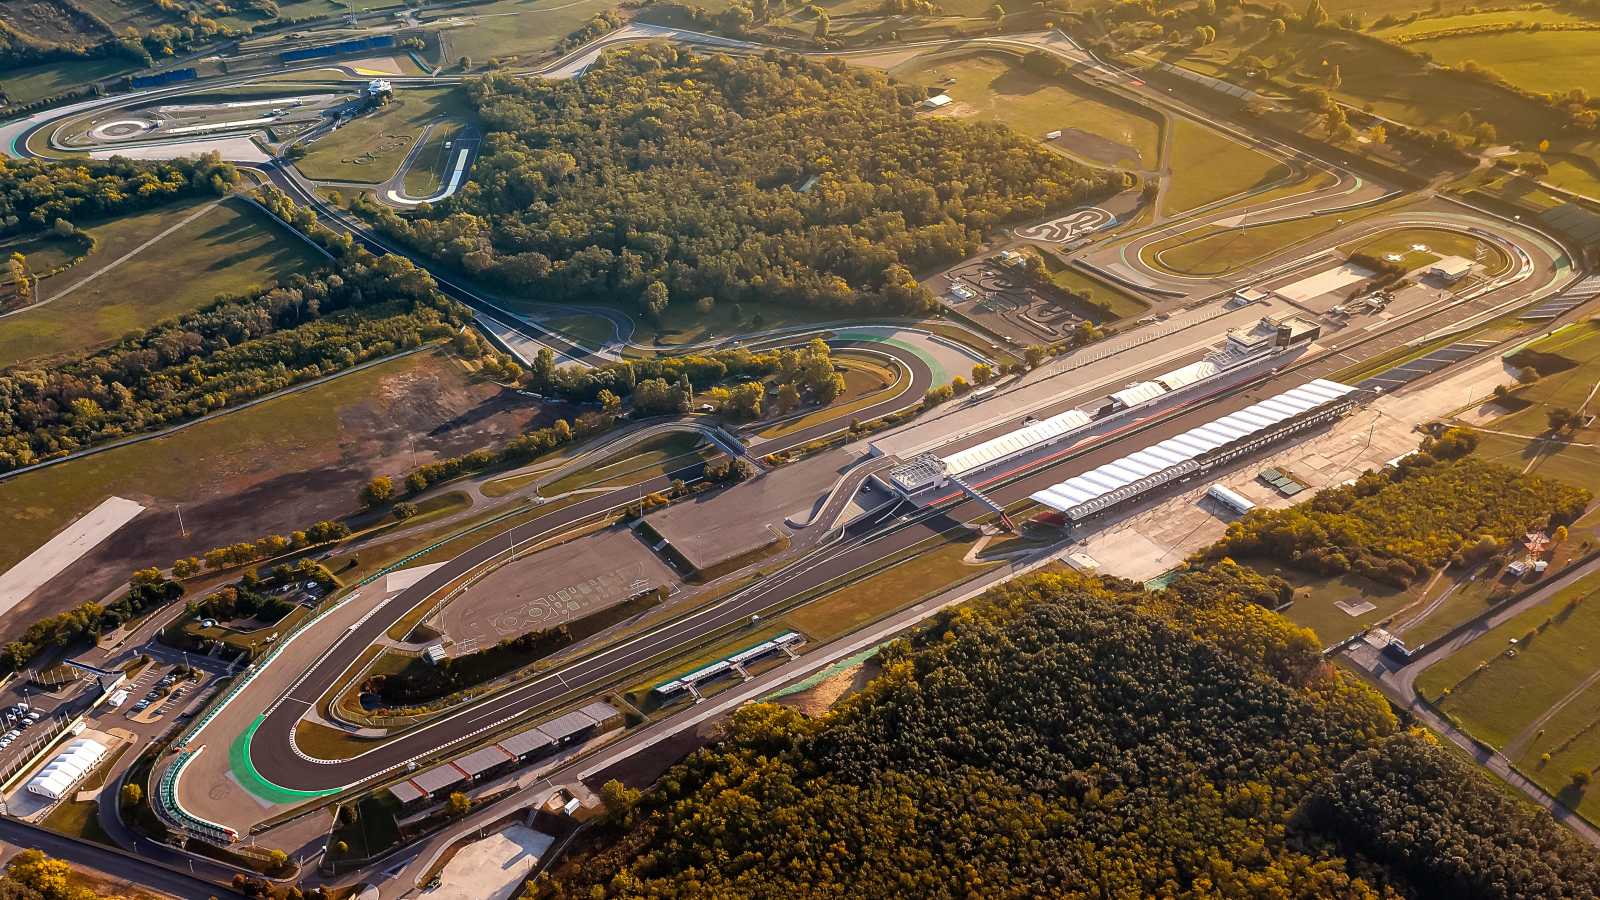 A view from above the Hungaroring. Hungary, October 2019.